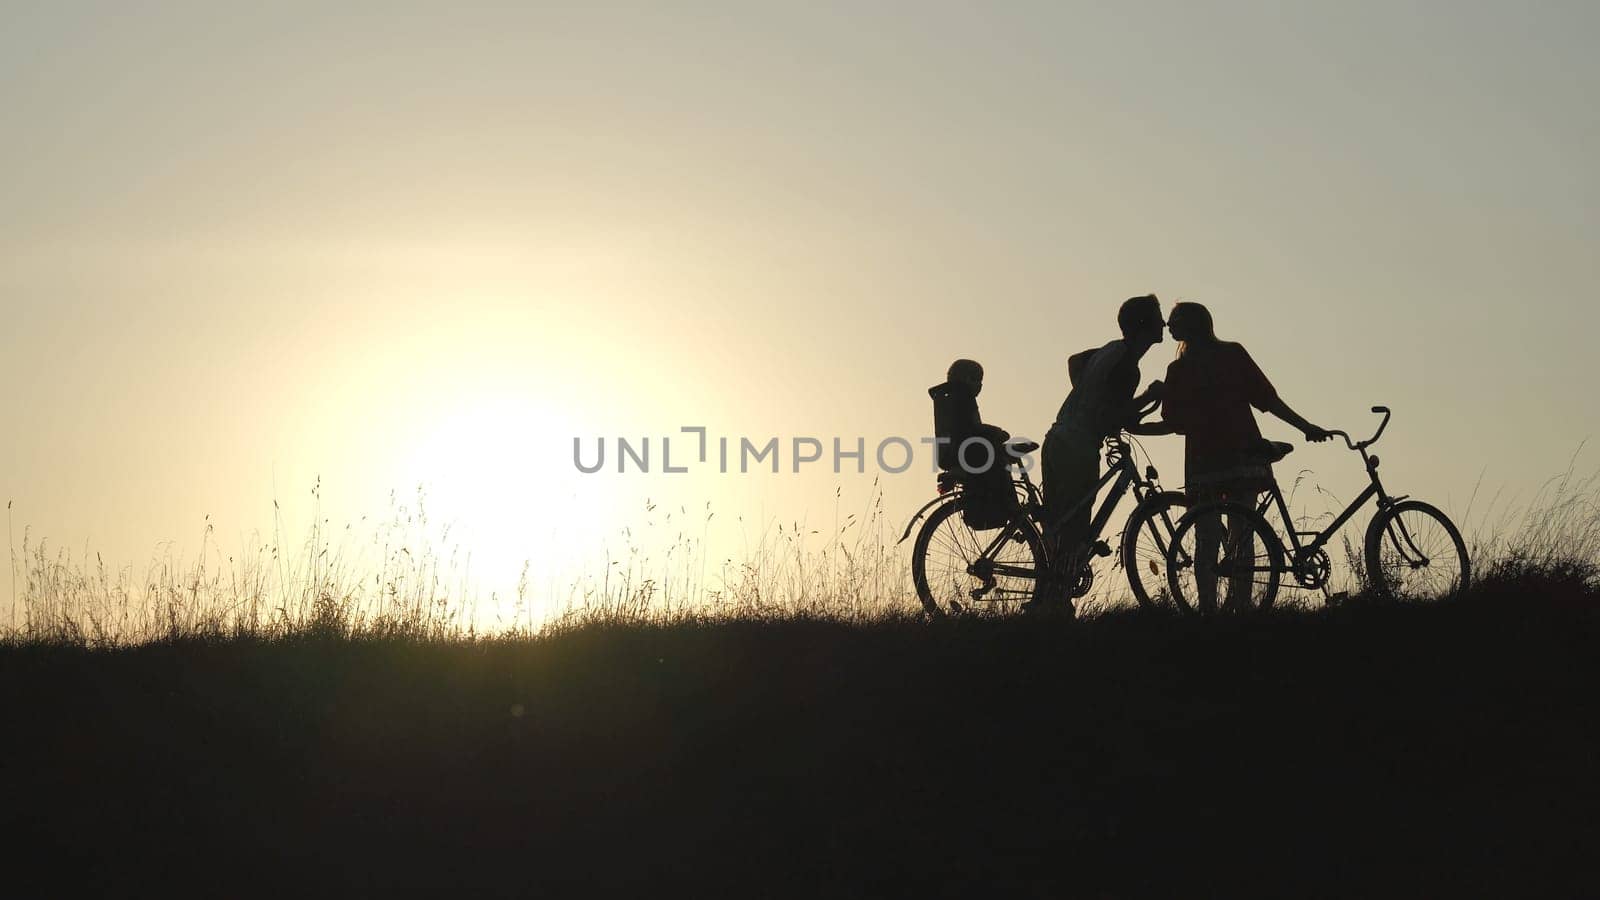 The newlyweds in love kiss with the child on the bicycles during the sunset. by DovidPro